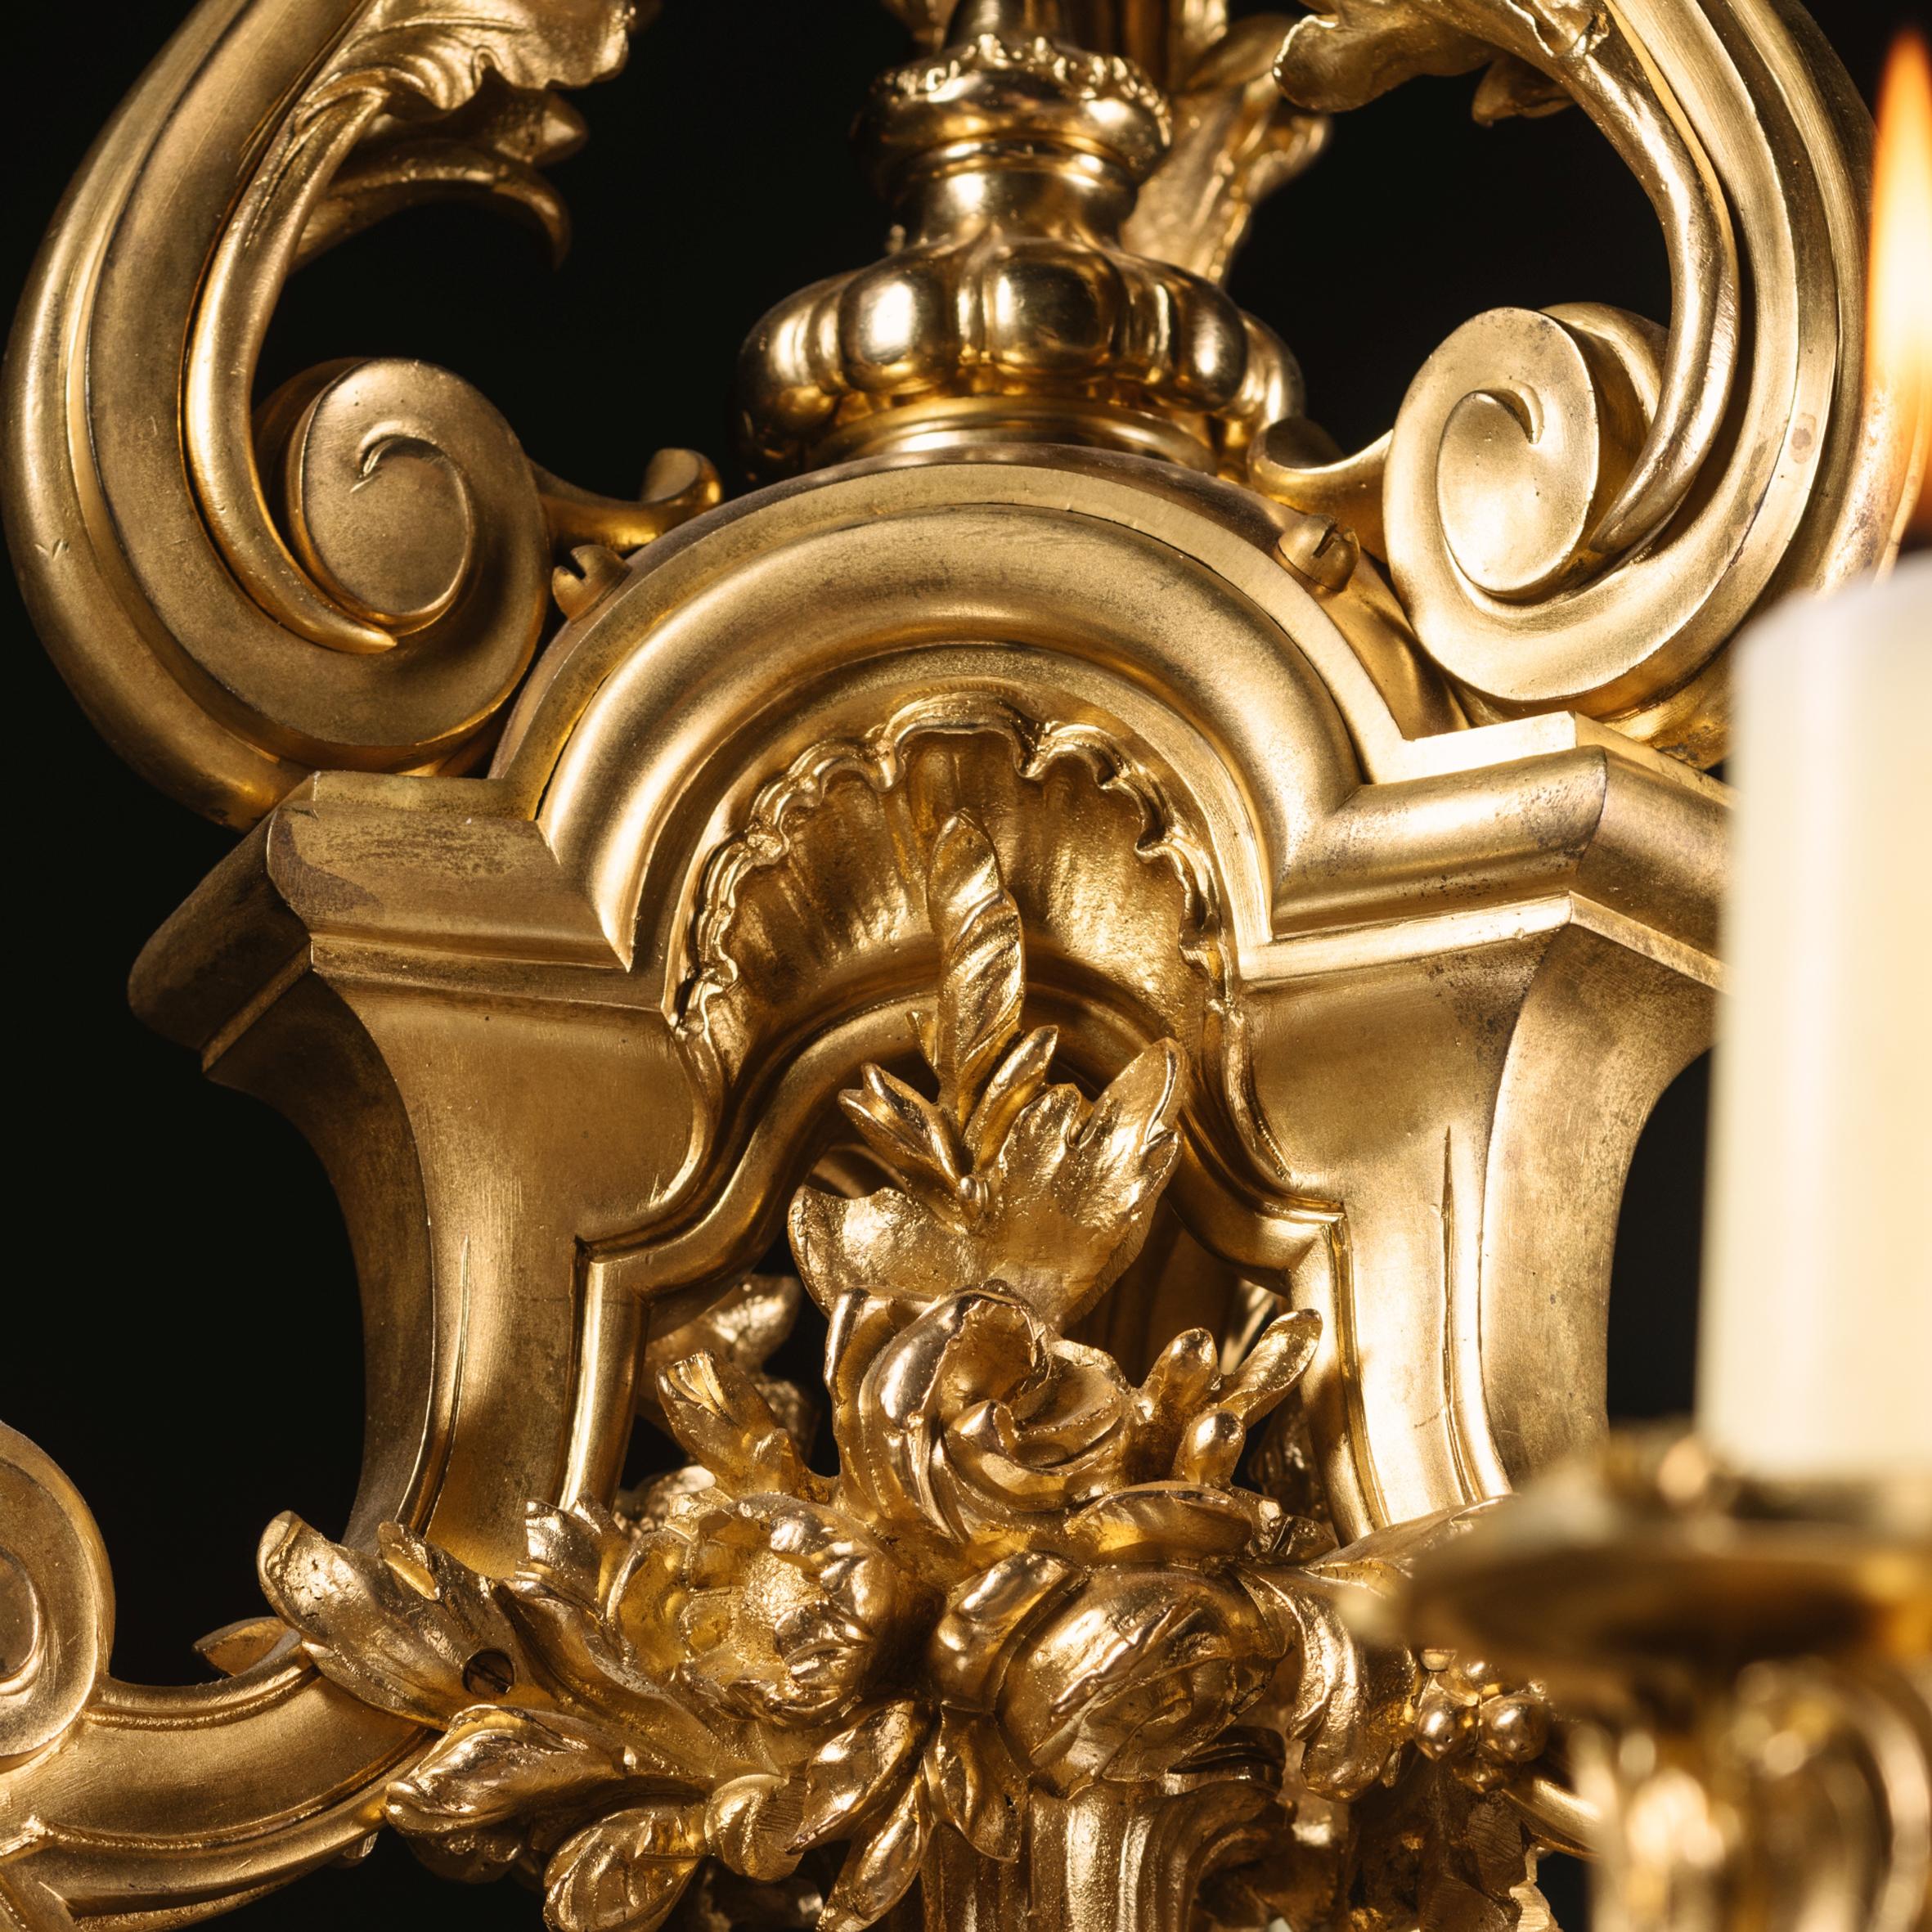 A fine Louis XV style gilt-bronze nine-light chandelier.

This impressive gilt-bronze tripartite baluster form cage chandelier is cast with a central vase issuing flowers and nine scrolling acanthus branches, terminating in foliate sconces.